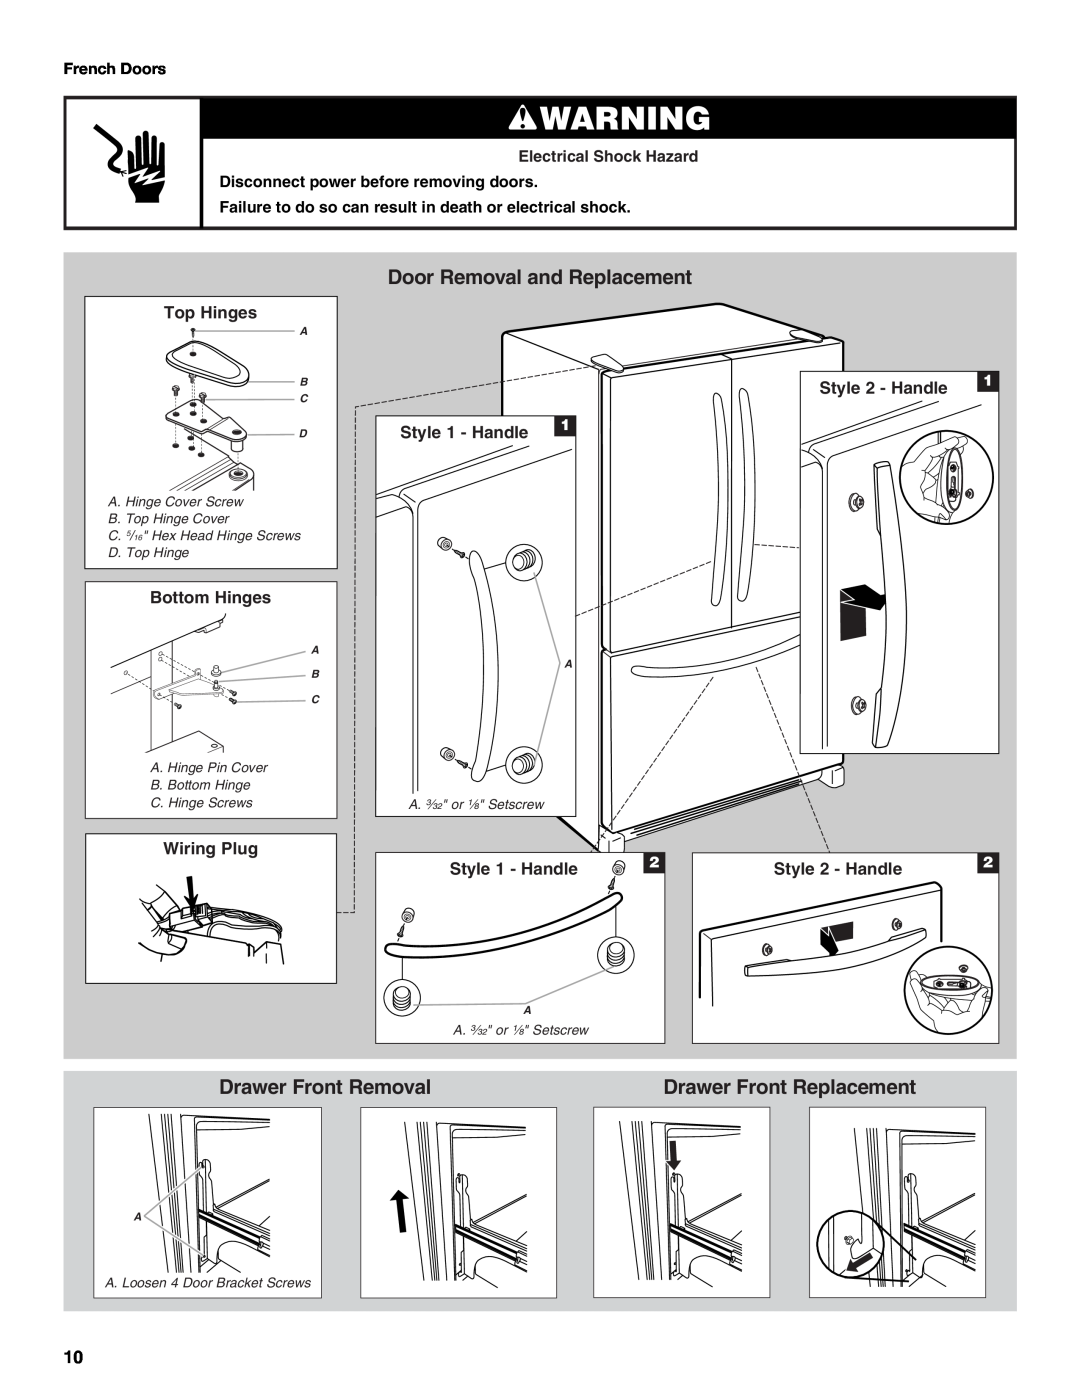 Maytag W10366206A Door Removal and Replacement, Drawer Front Removal, Drawer Front Replacement, Top Hinges, Bottom Hinges 